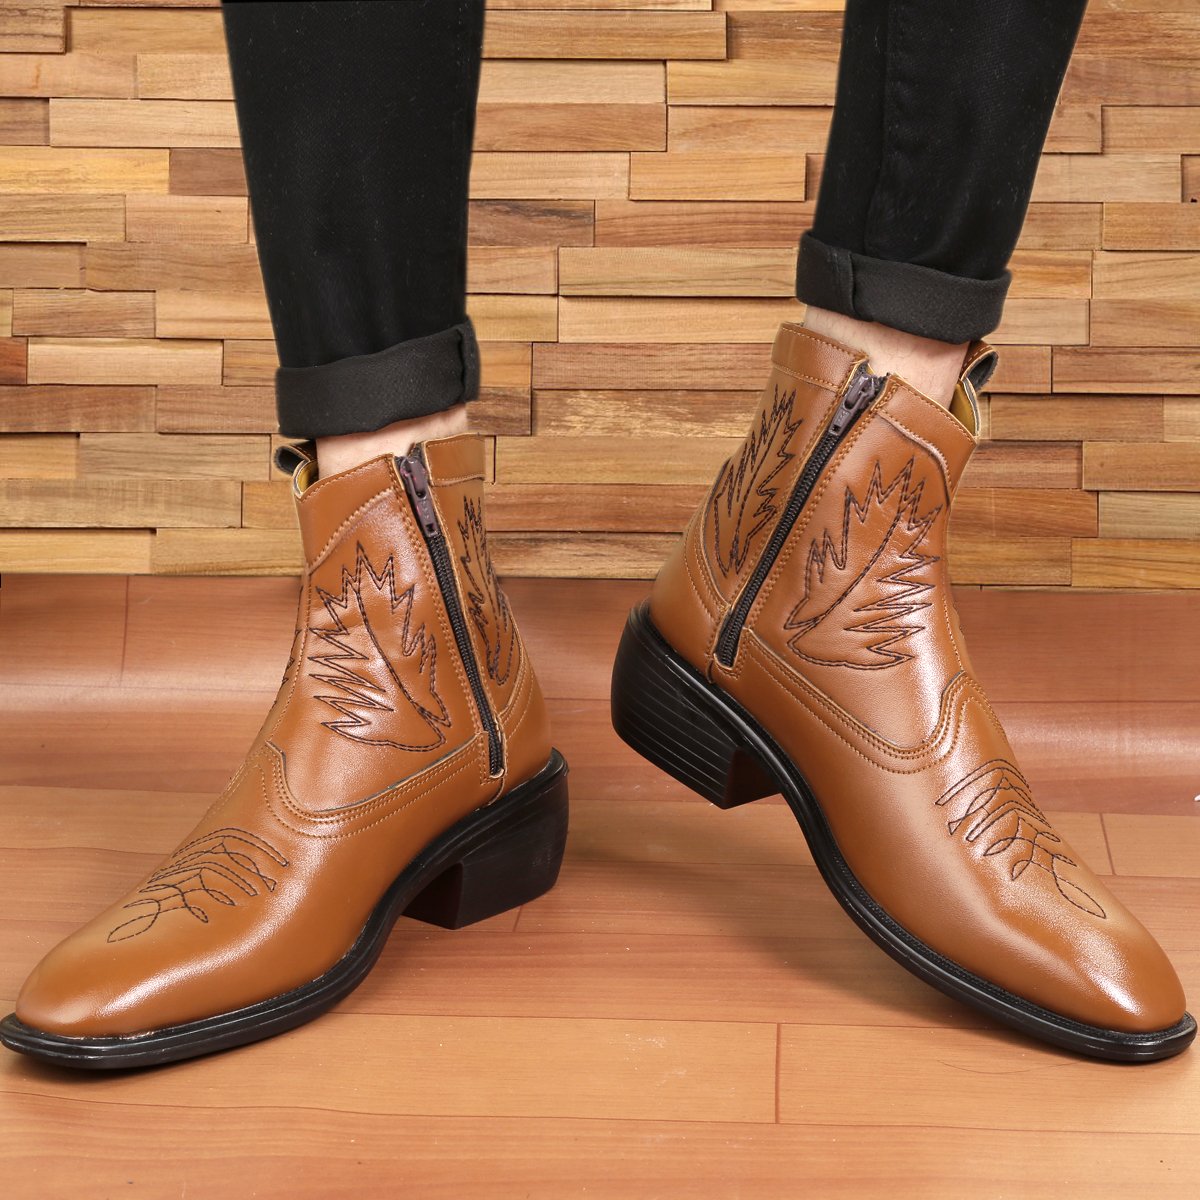 Buy New Men's Formal and Casual Retro Tan Boots for all seasons